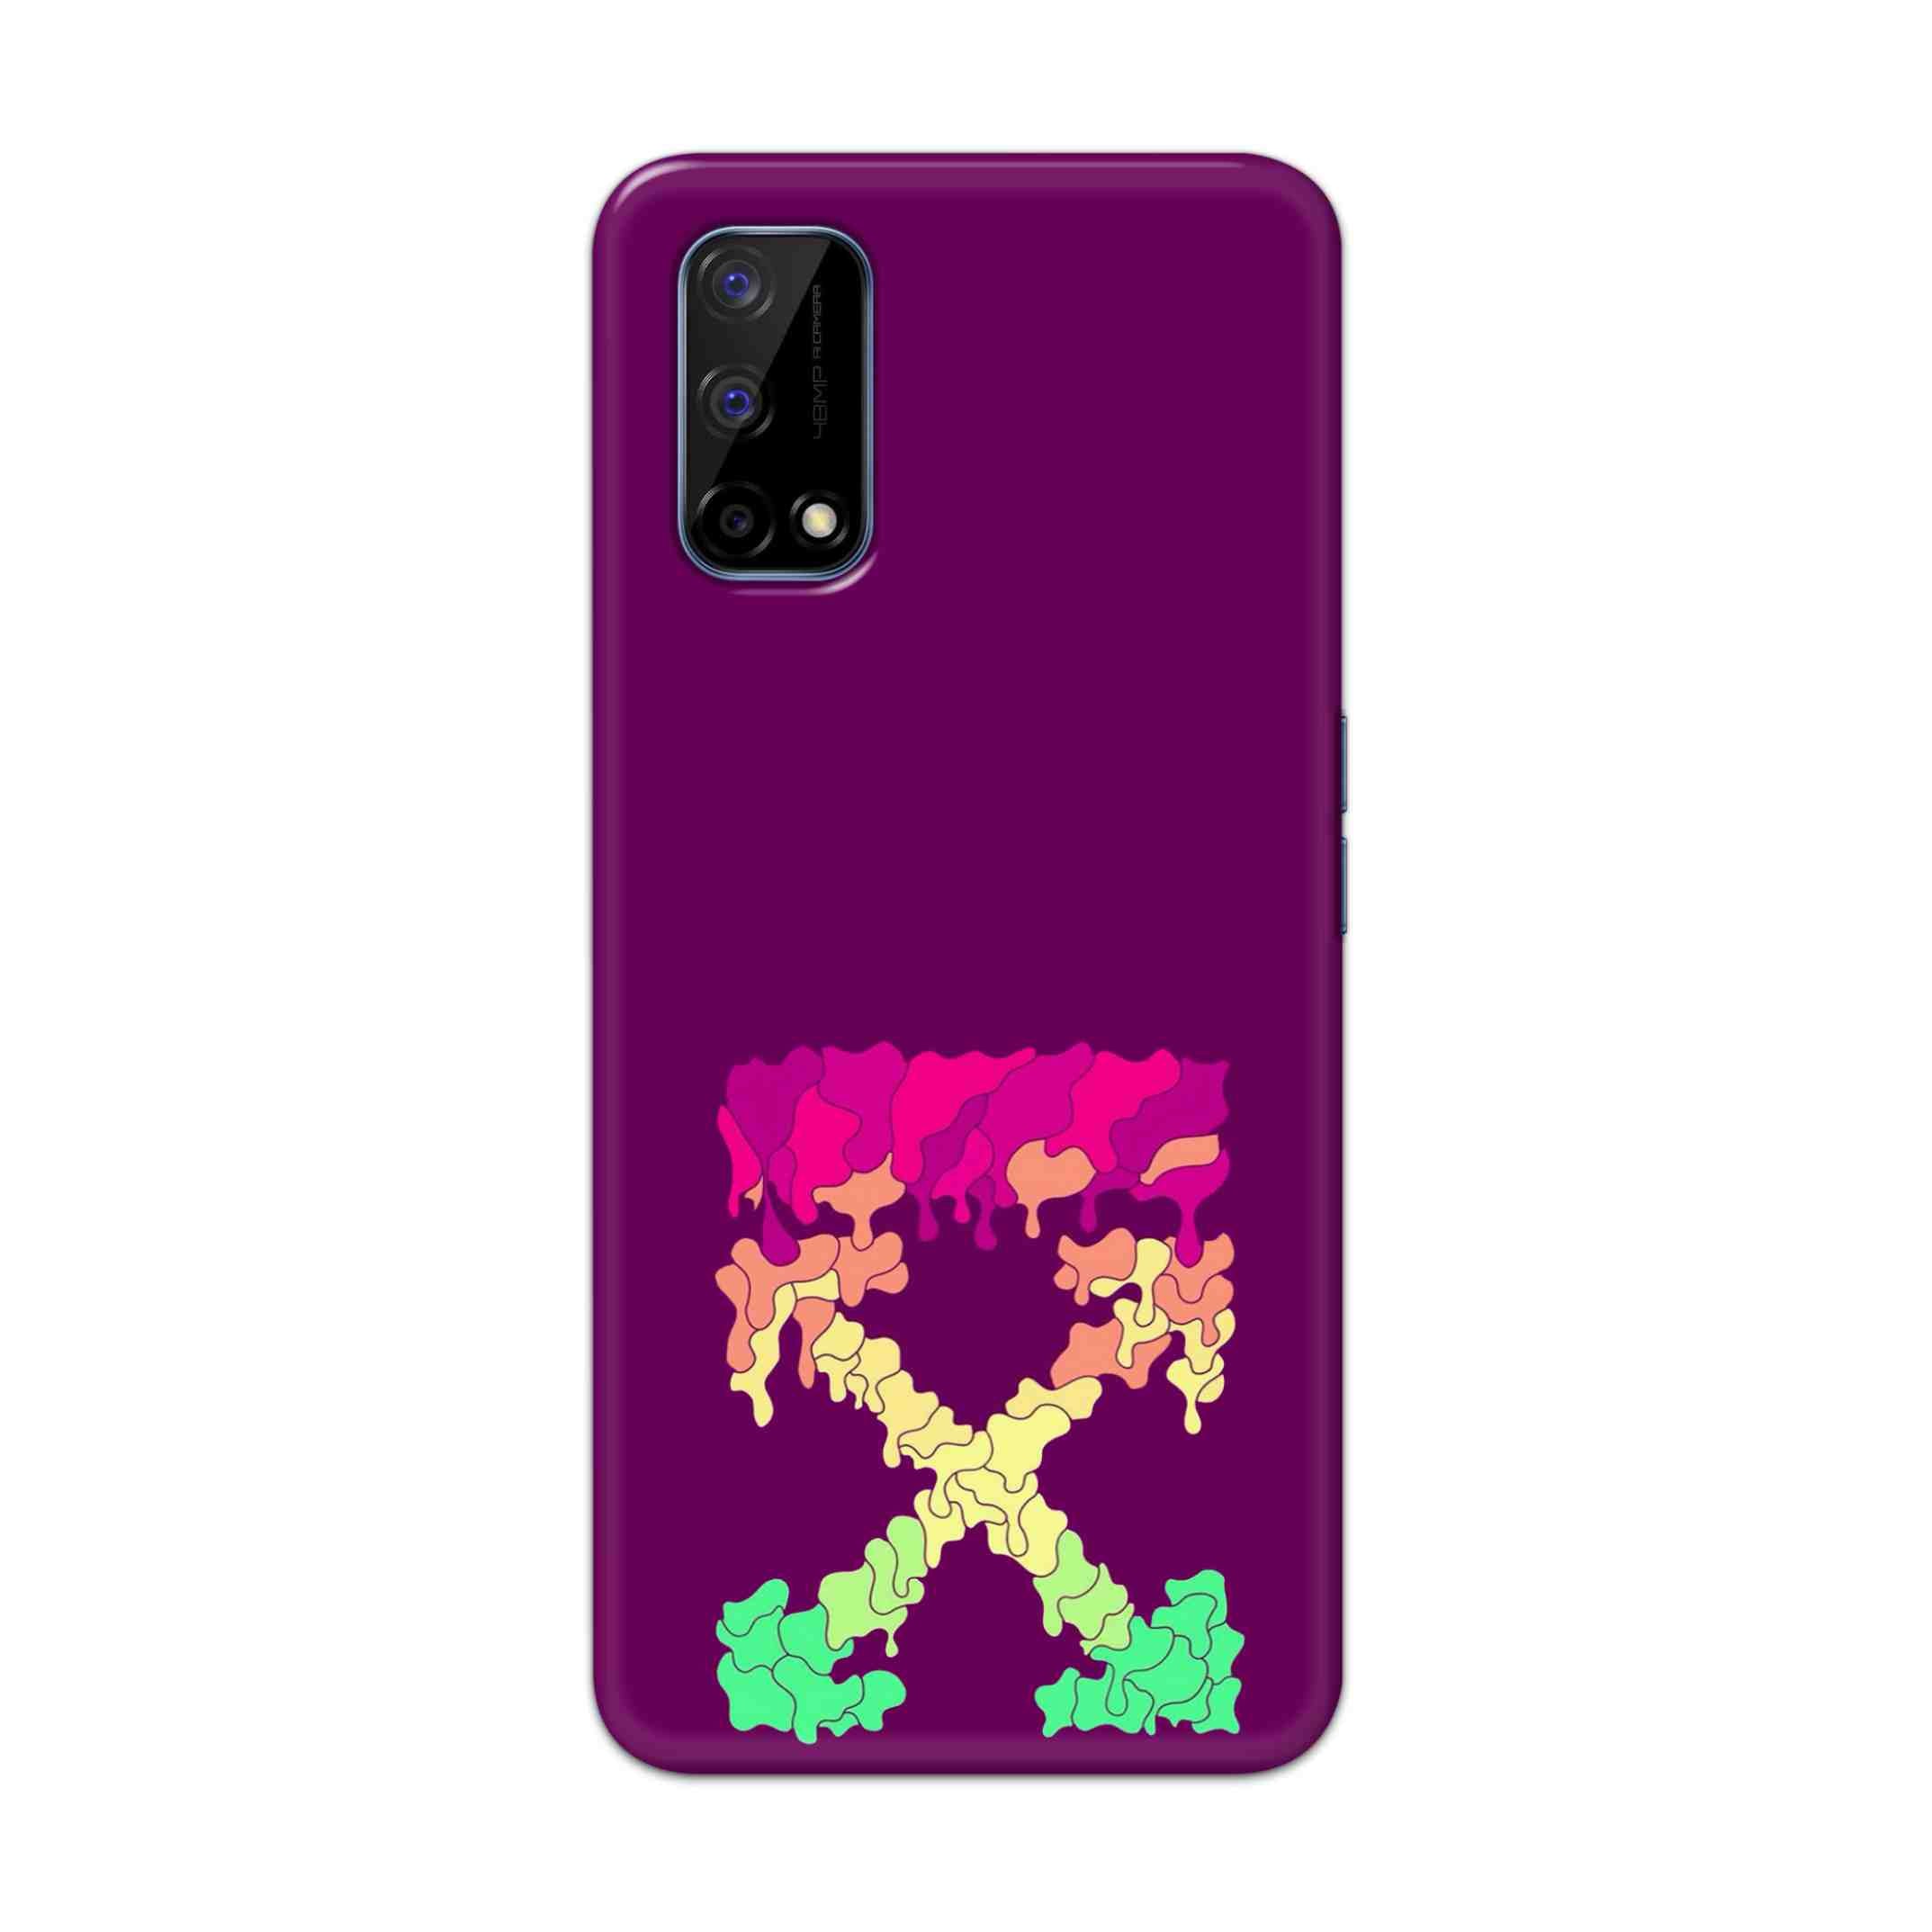 Buy X.O Hard Back Mobile Phone Case Cover For Realme Narzo 30 Pro Online